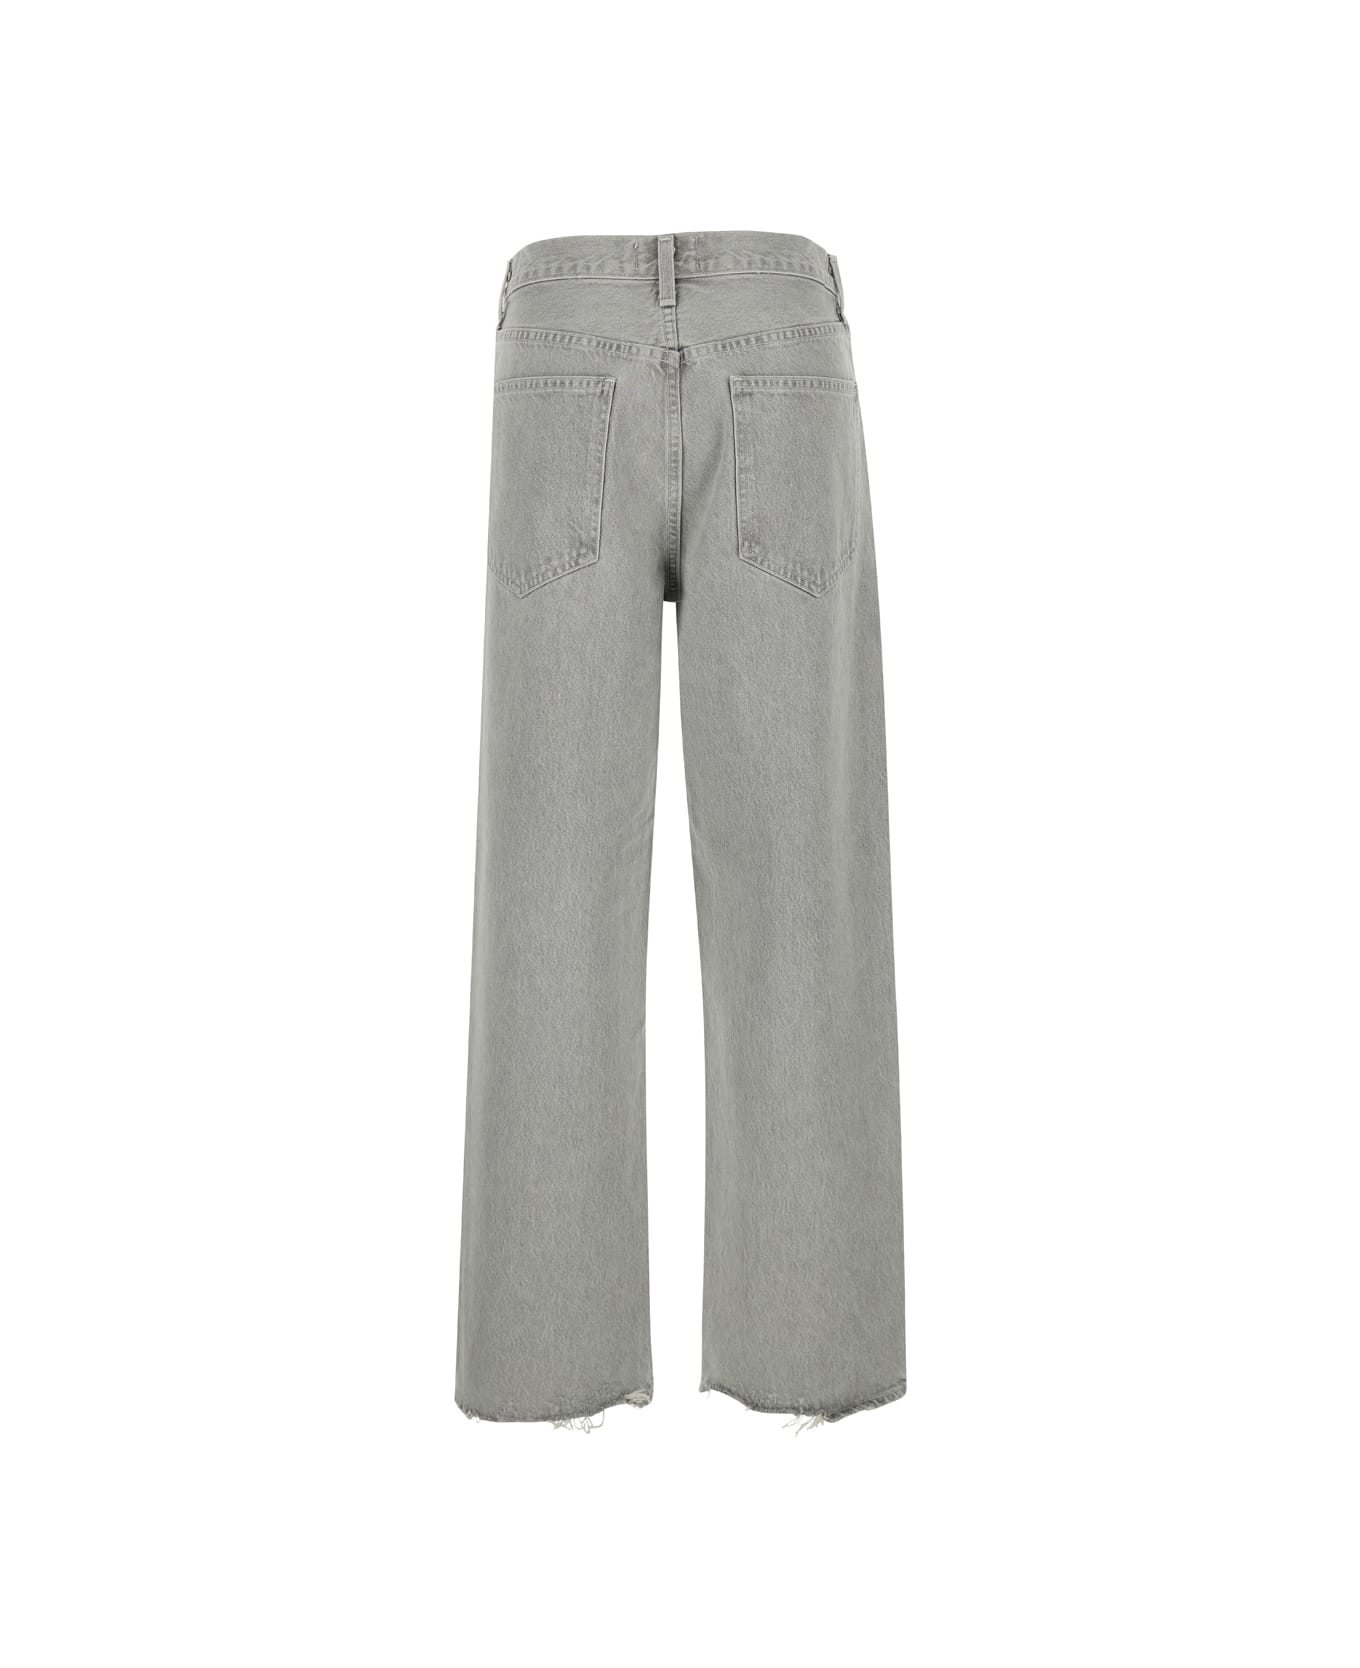 AGOLDE Grey Jeans With Criss Cros Detail In Denim Woman - Grey